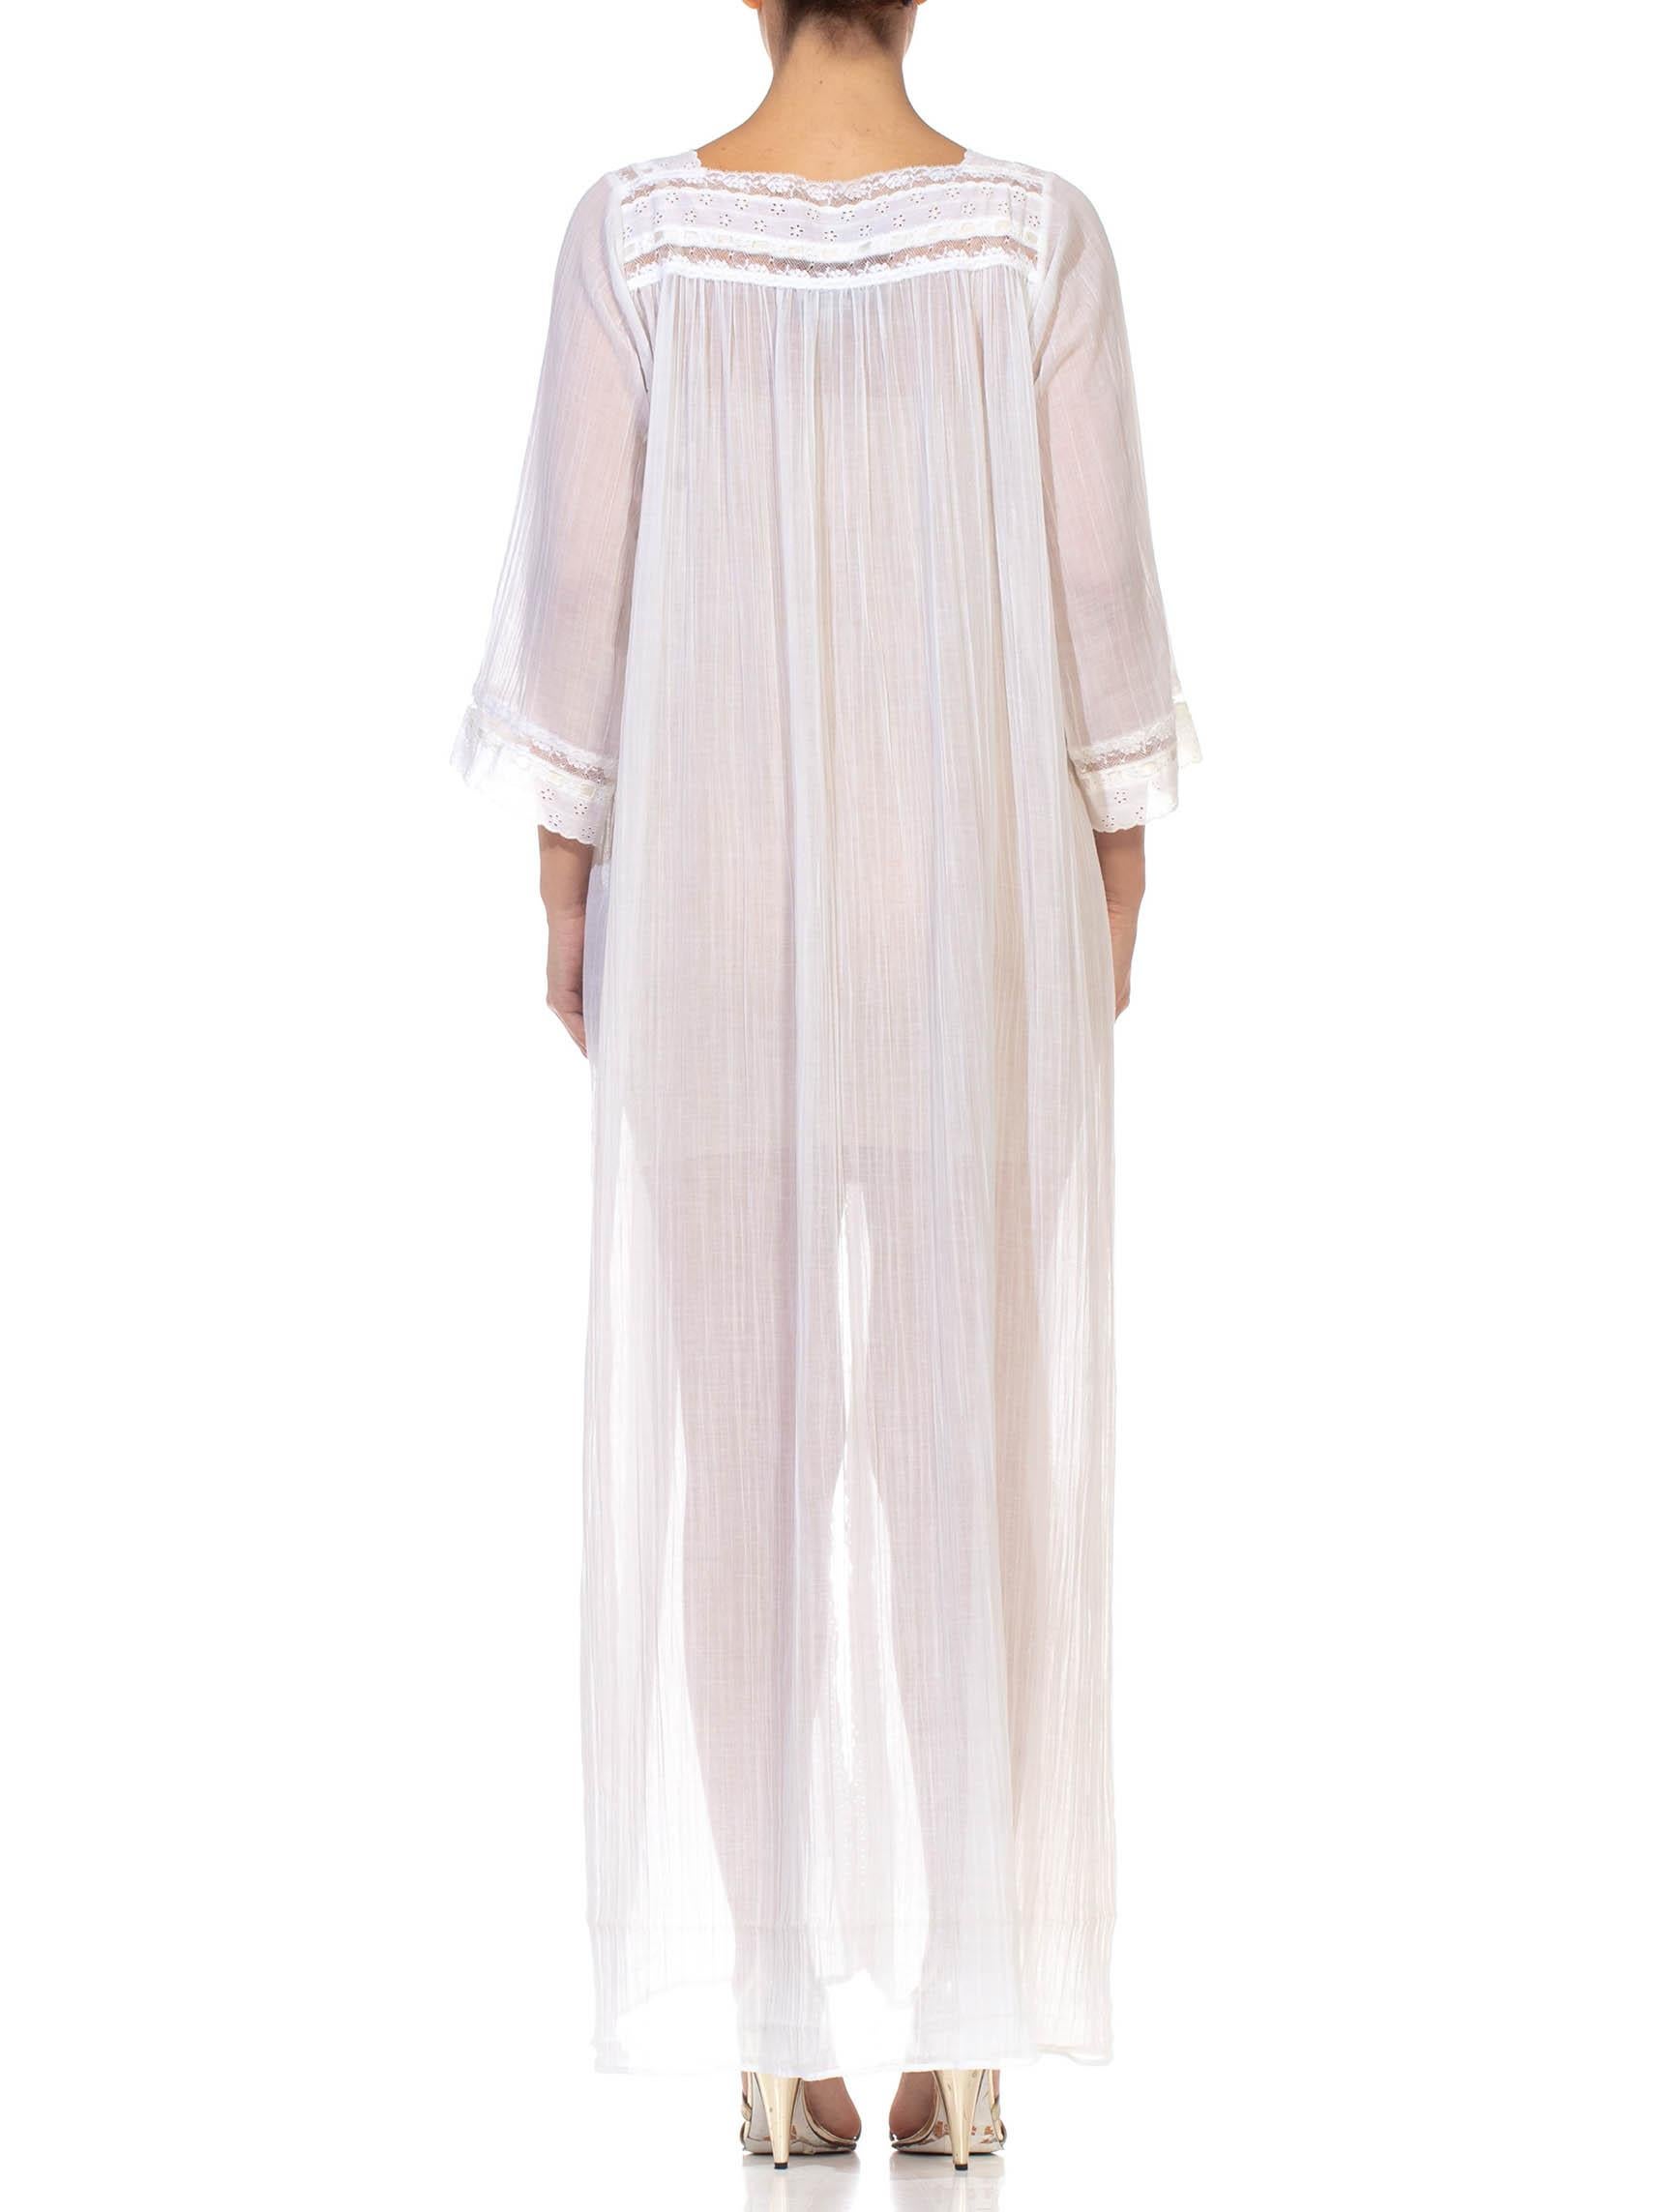 1980S CHRISTIAN DIOR White Cotton Lace Trimed Robe With Front Tie Closure 4